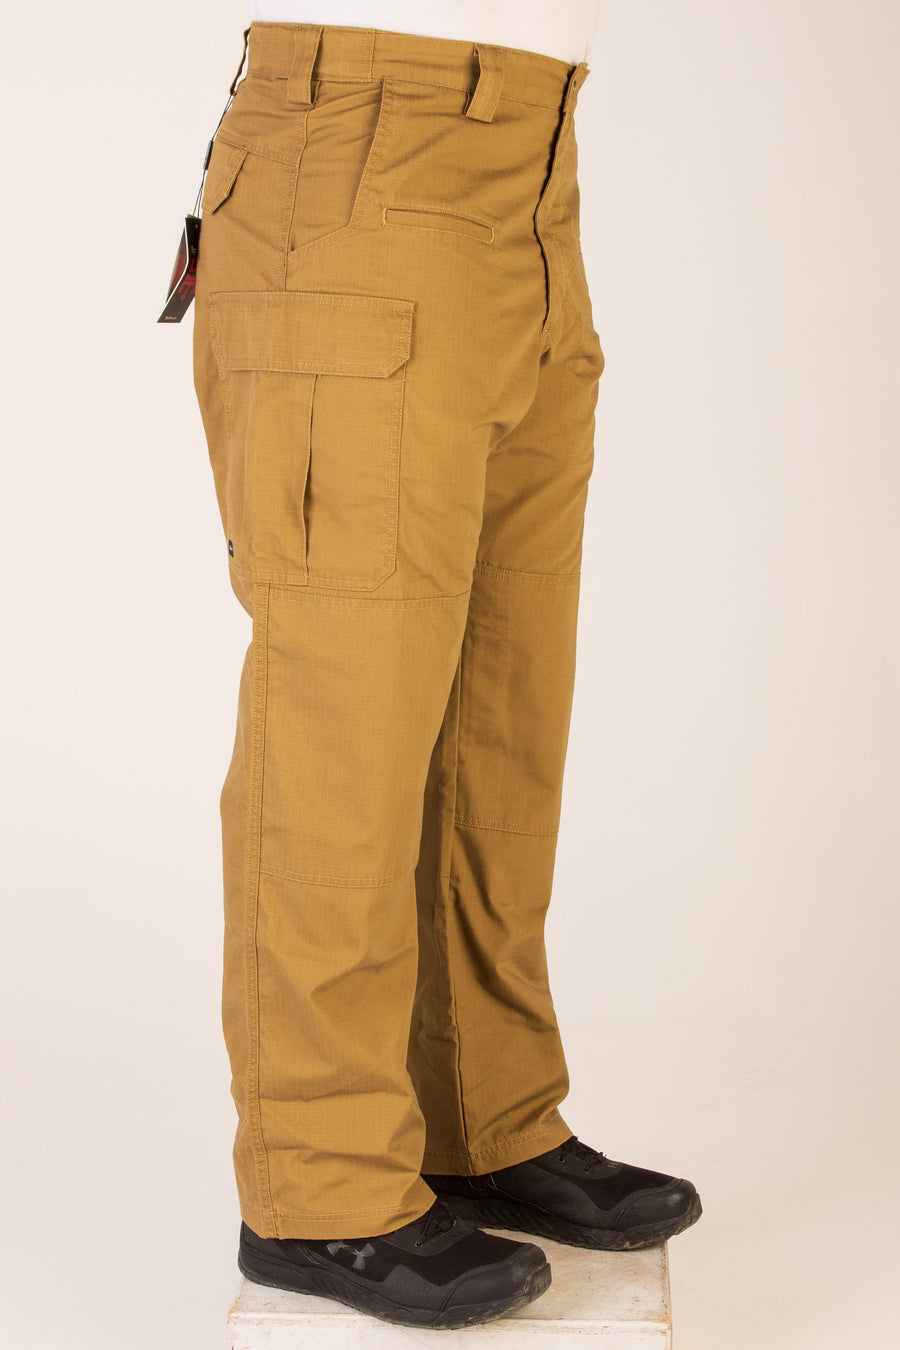 SpryTac Heavy Duty 100% Ripstop Tactical Cargo Pants